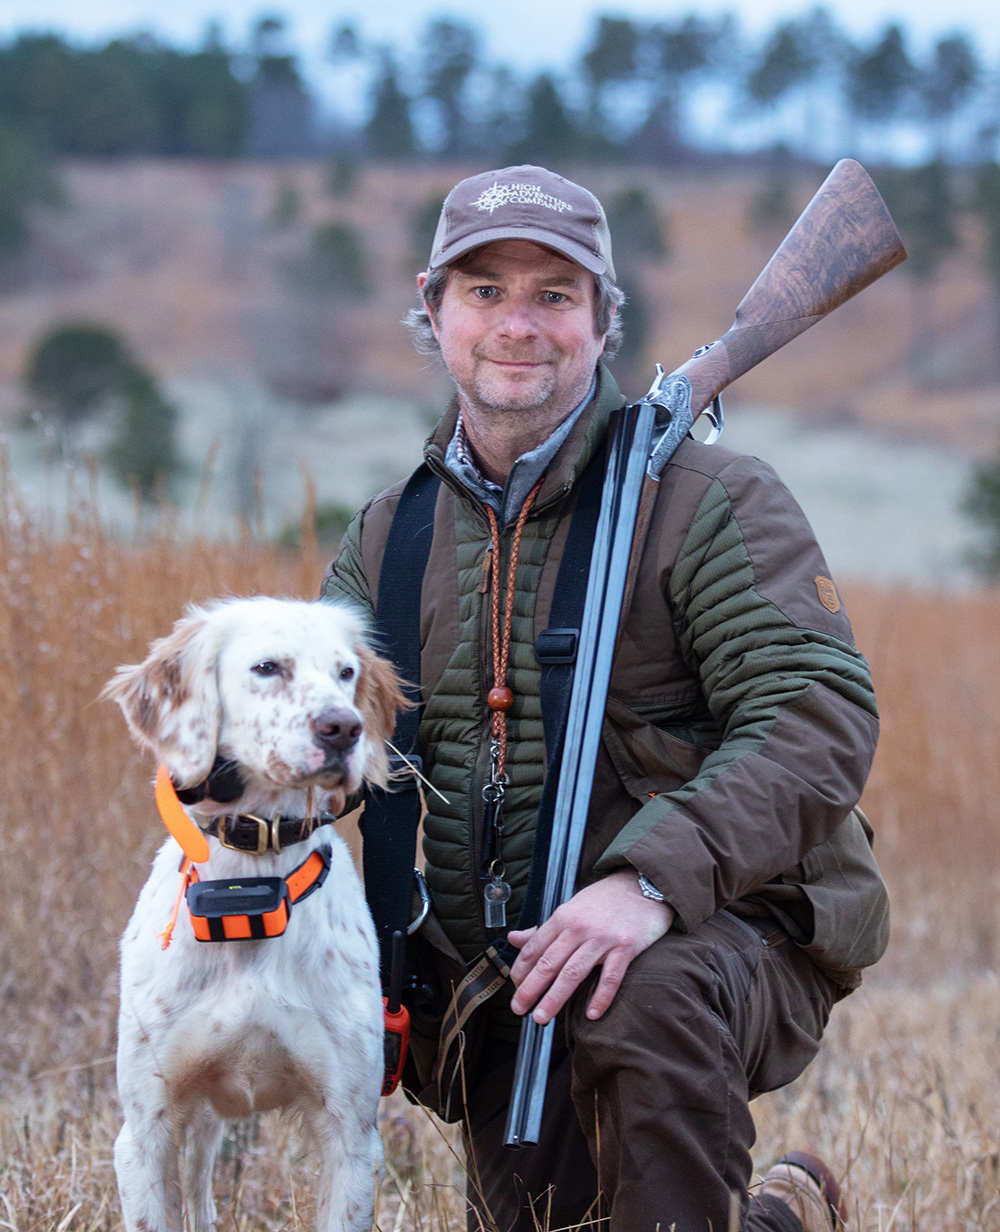 John Burrell kneeling outdoors in grassy field with hunting dog.